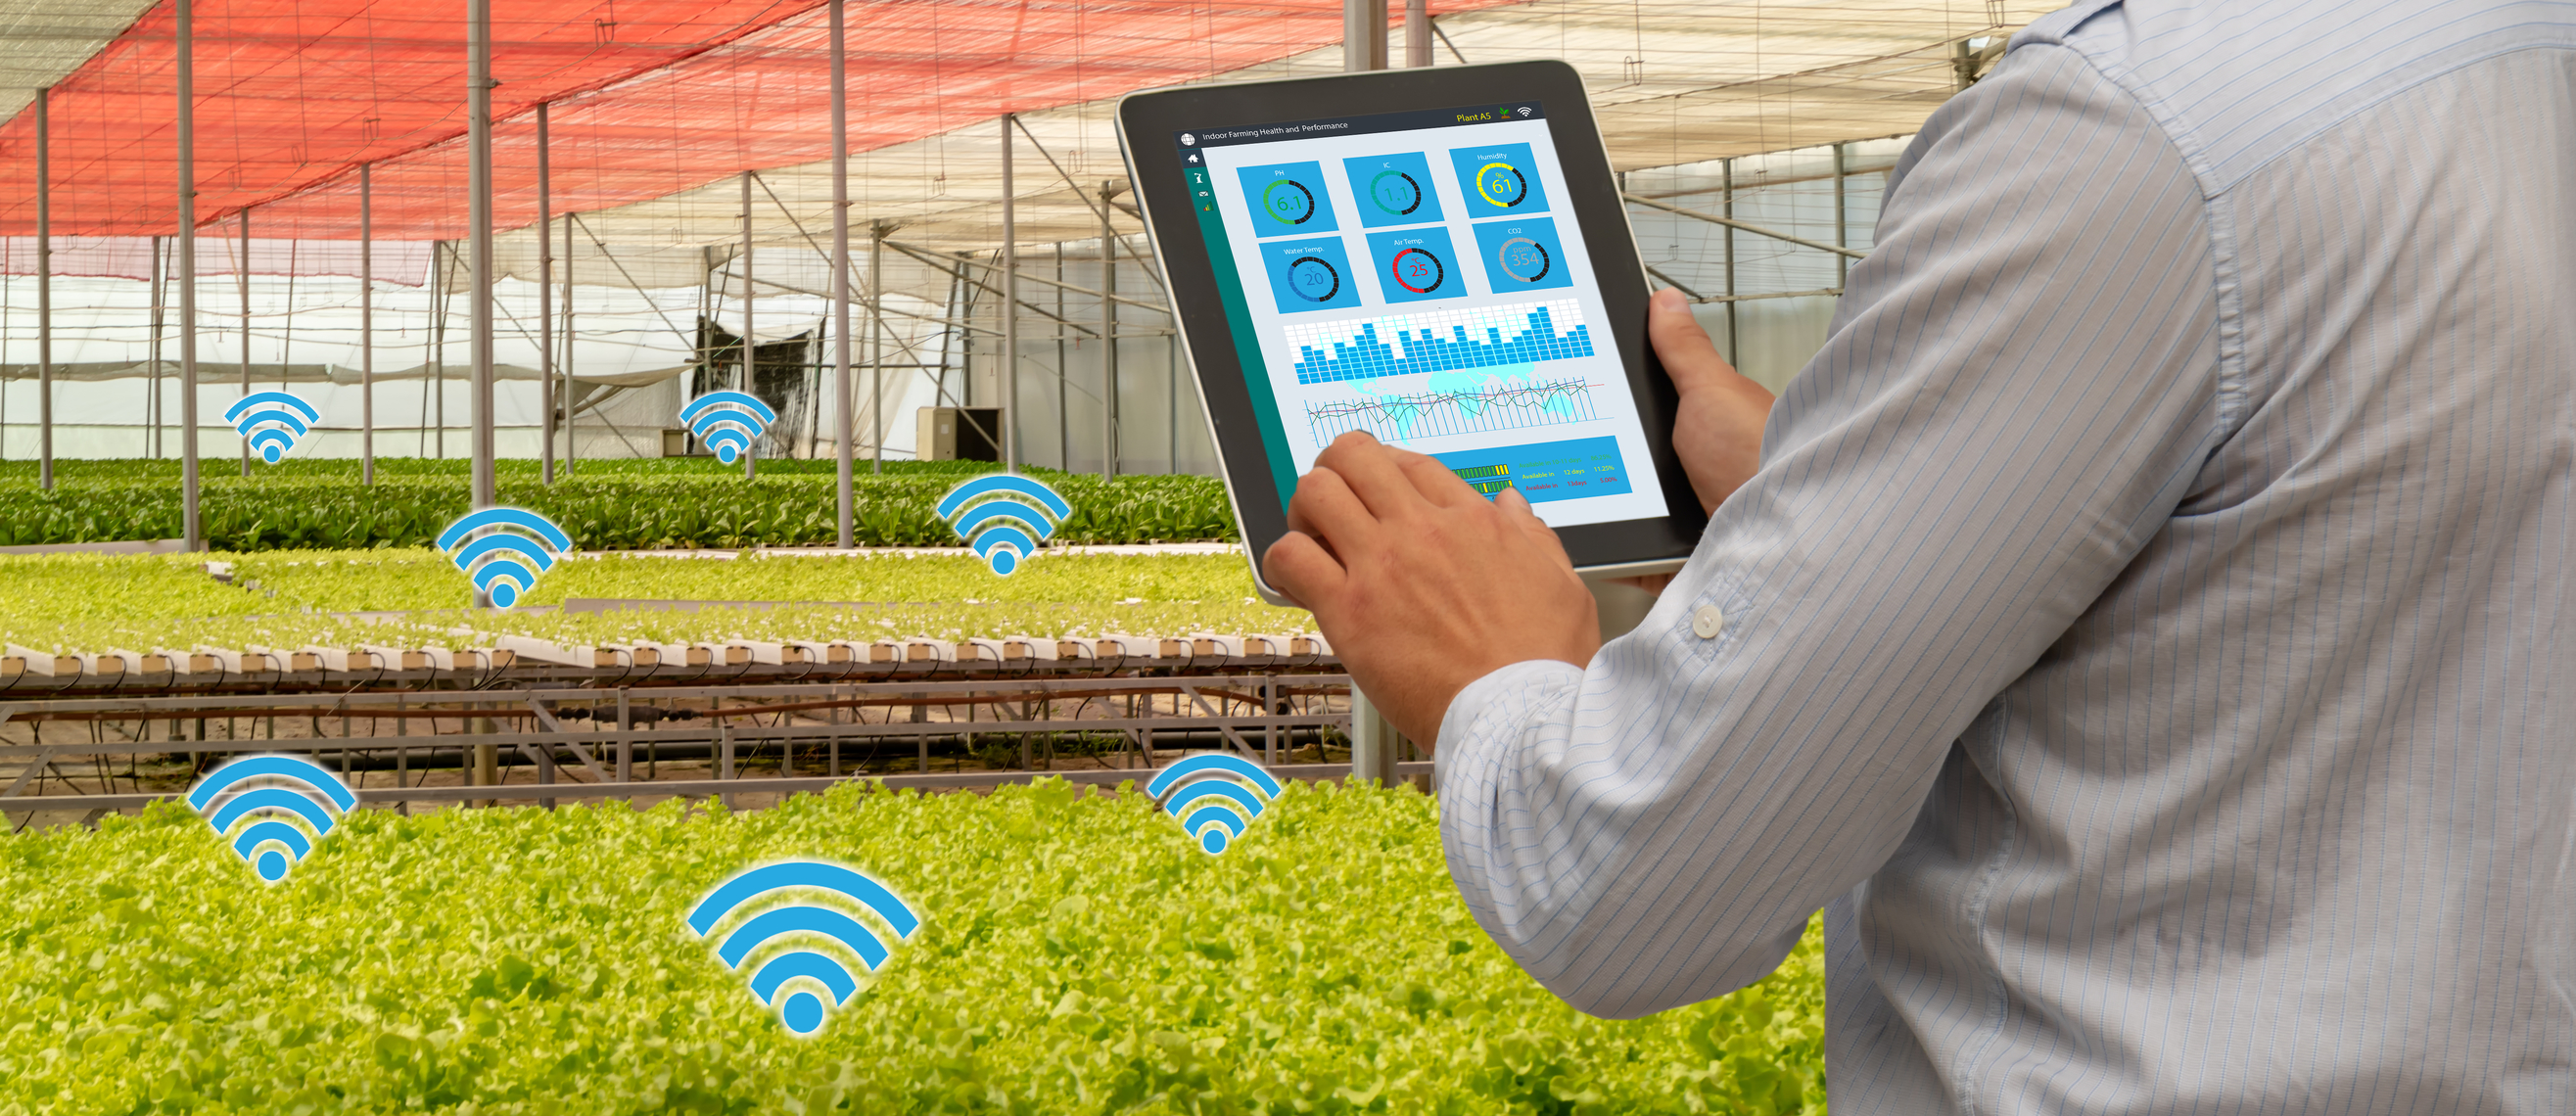 How IoT technology improves food safety & restaurant efficiency